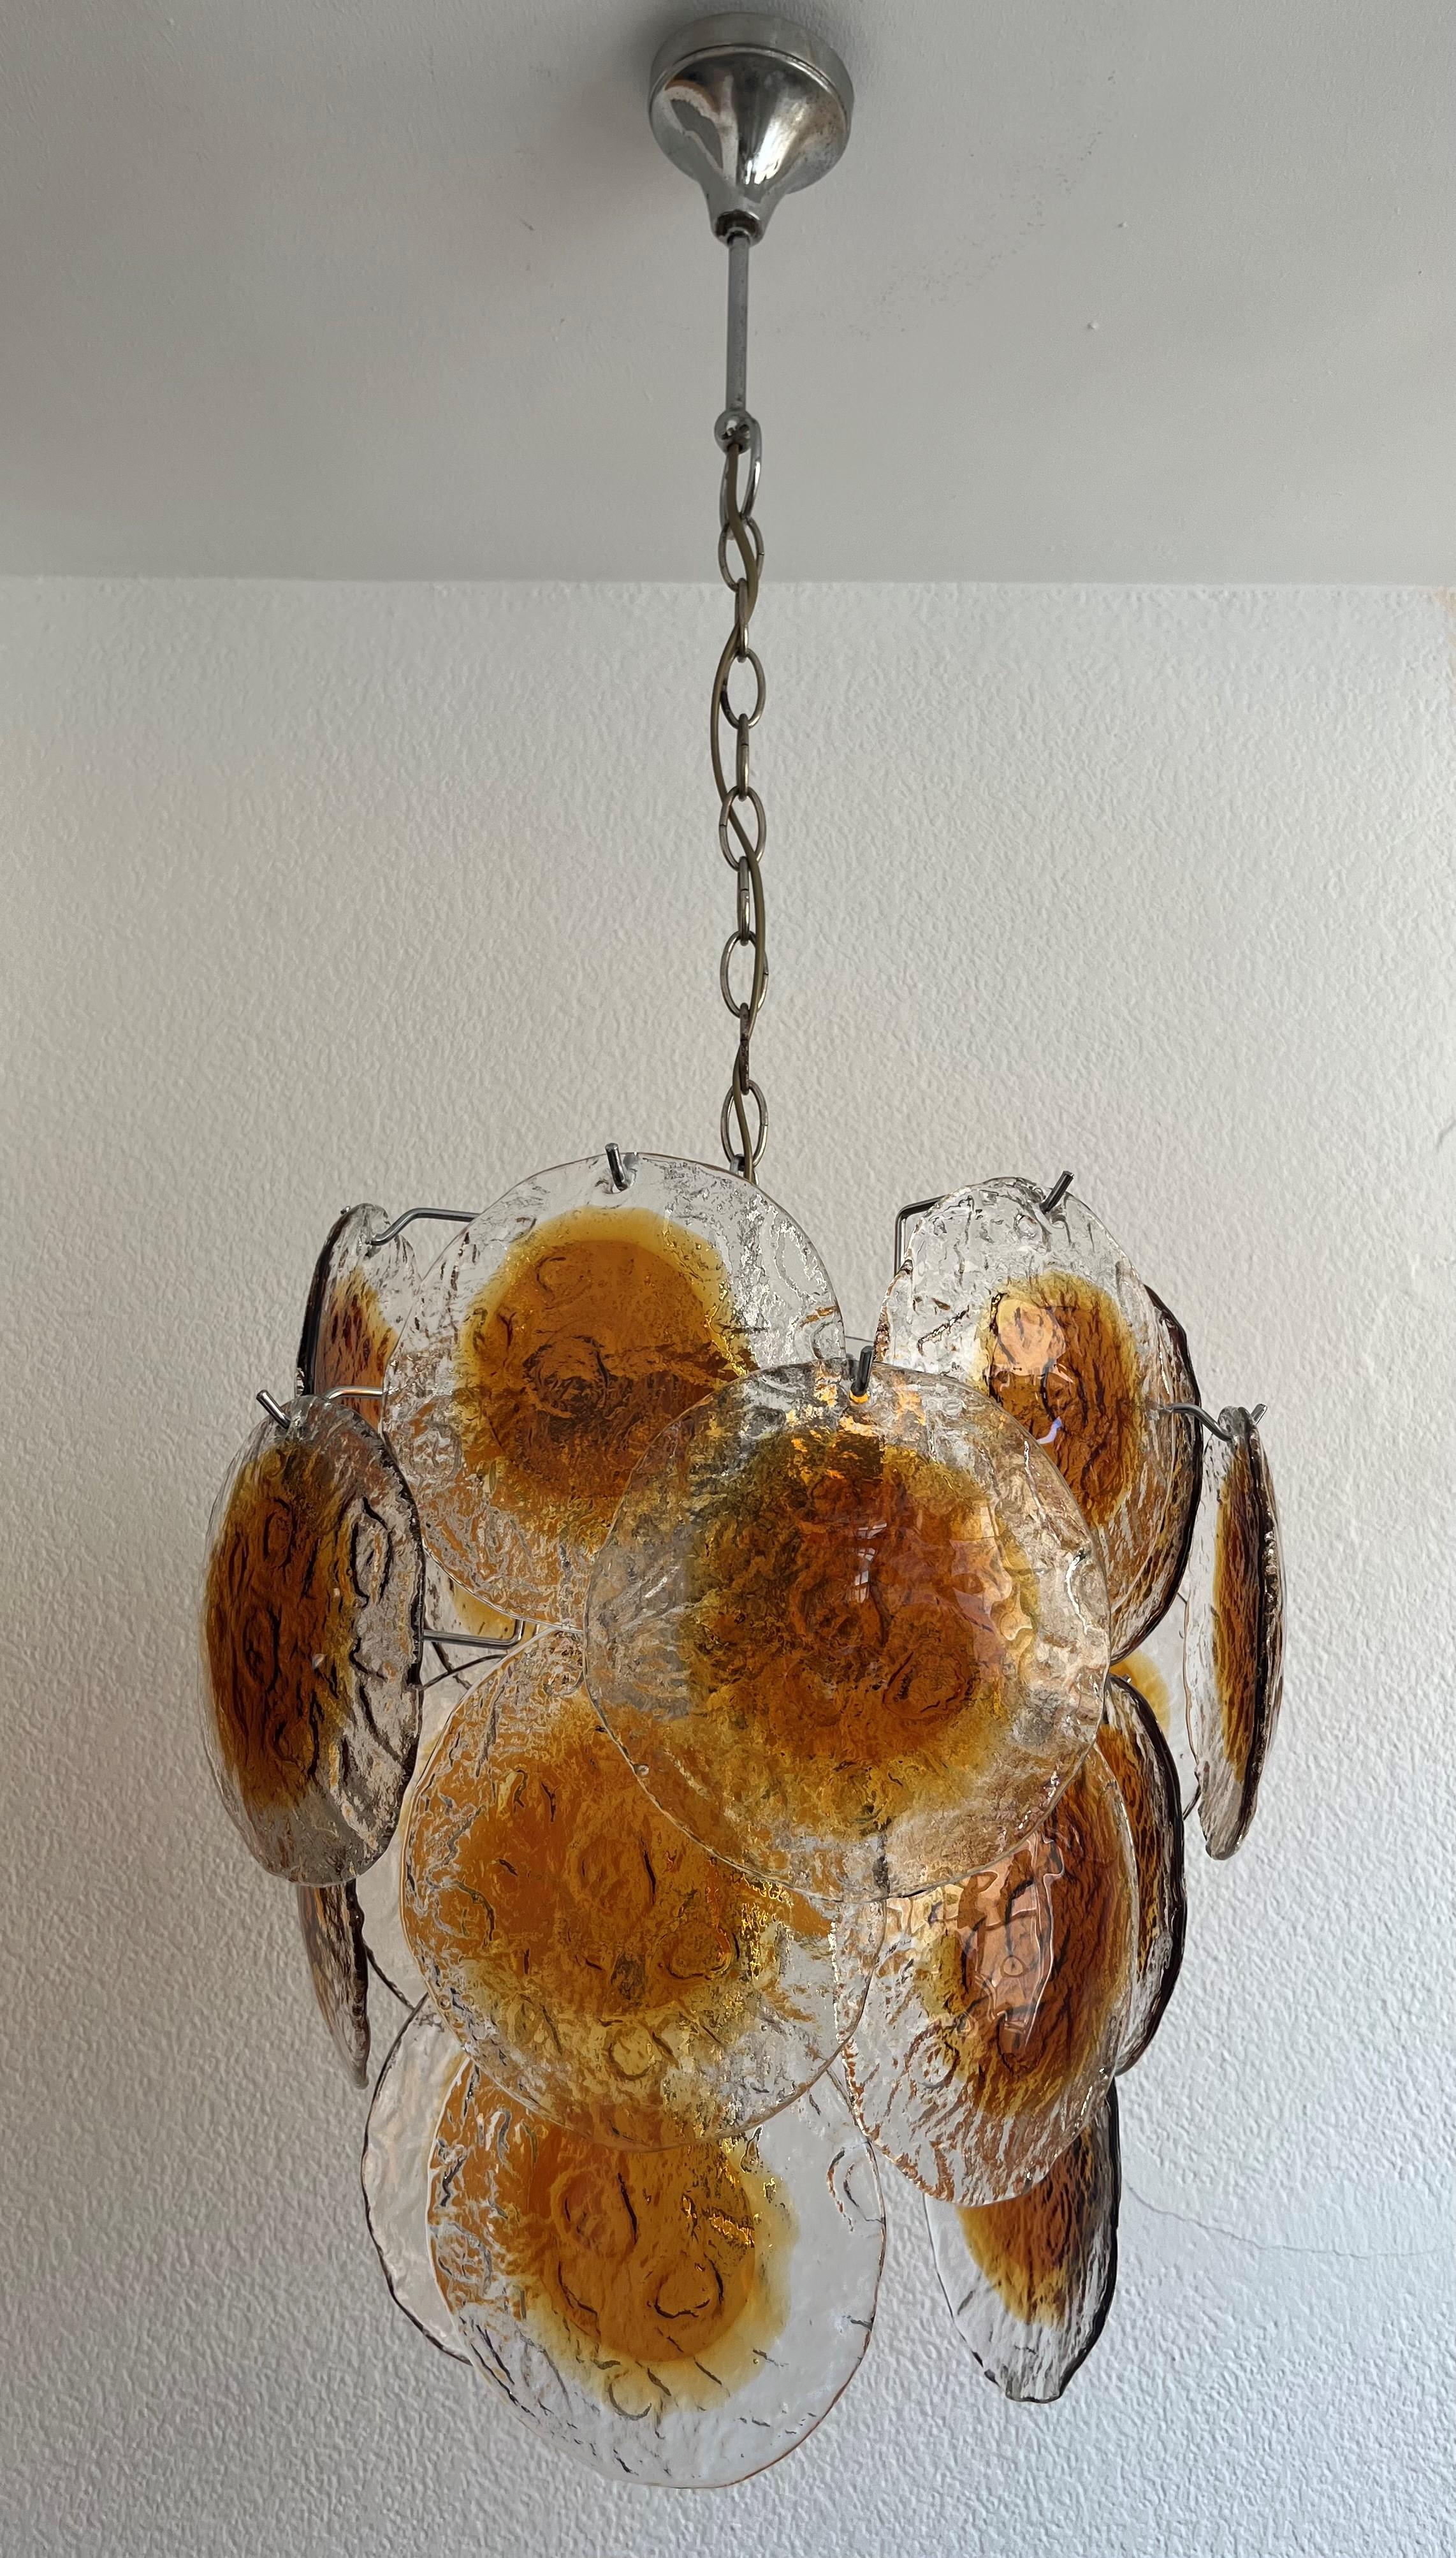 Stunning Italian amber clear Murano discs Chandelier from 1970s. This fixture was designed and manufaactured during the 1970s in Italy.
This fixture is composed by 20 murano disc glasses.
This Chandelier is equipped with 6 light sockets E14. A